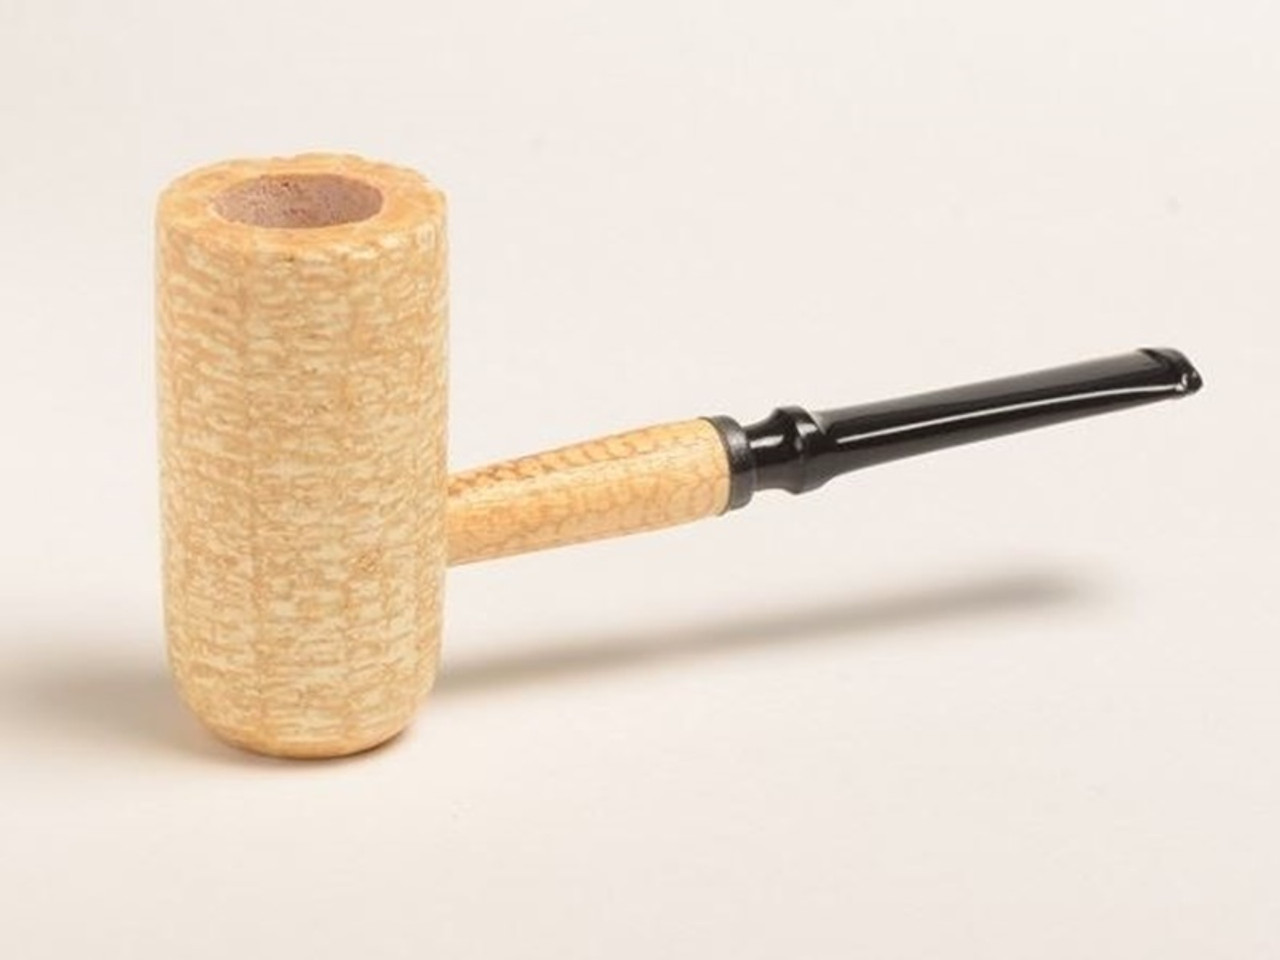 Missouri Meerschaum Freehand Corn Cob Pipe at The Pipe Nook!